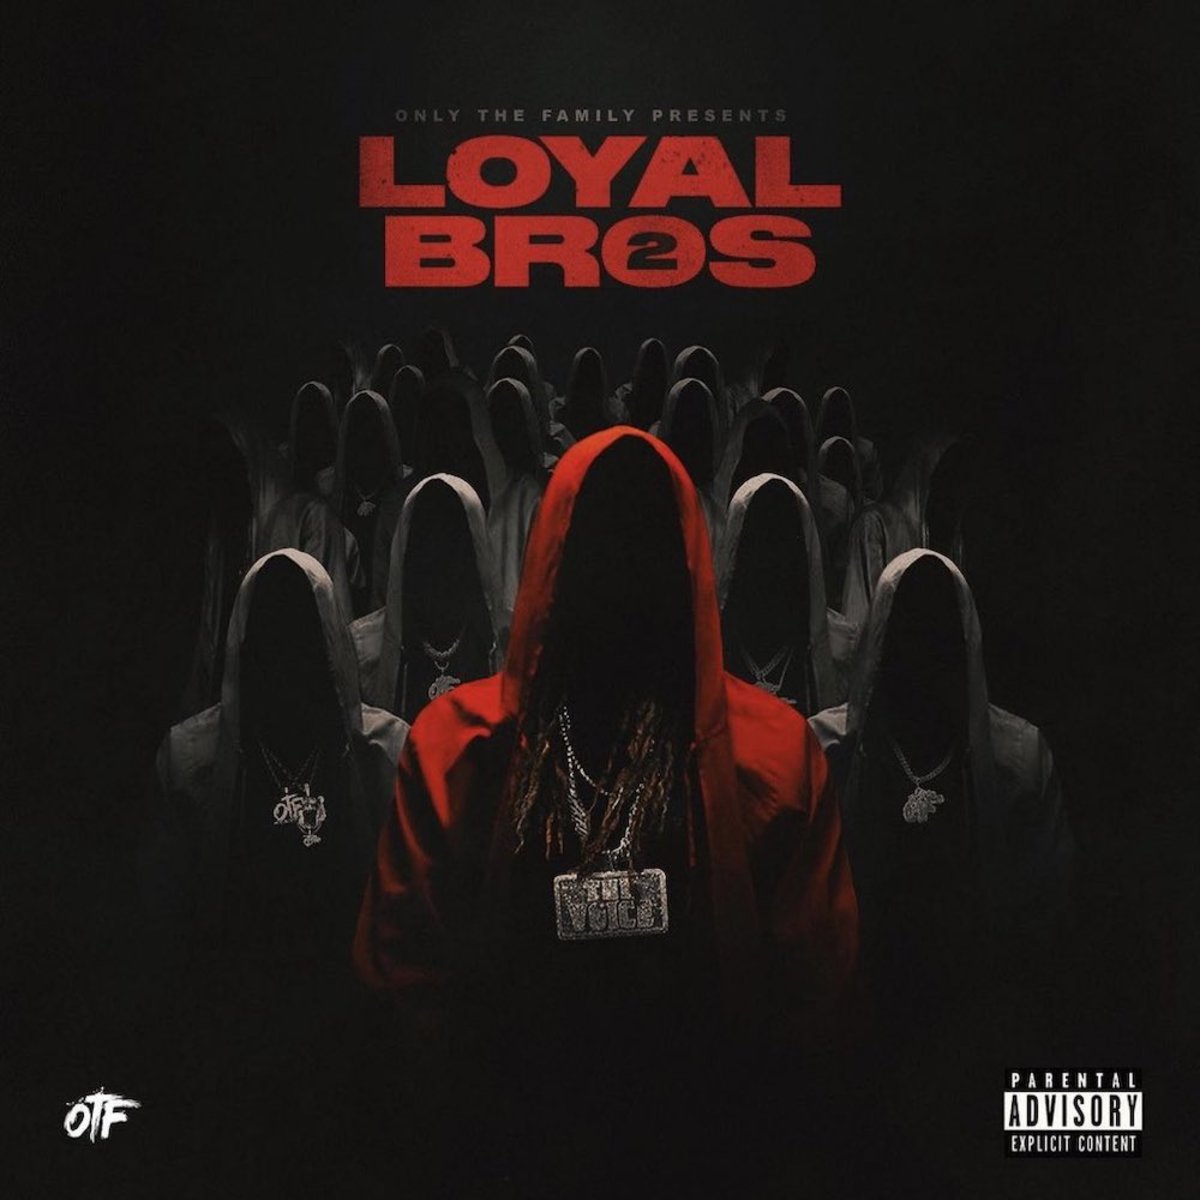 https://images.complex.com/complex/images/c_fill,f_auto,g_center,w_1200/fl_lossy,pg_1/pafgts4yxq0jvkfsdosb/lil-durk-only-the-family-loyal-bros-2-stream